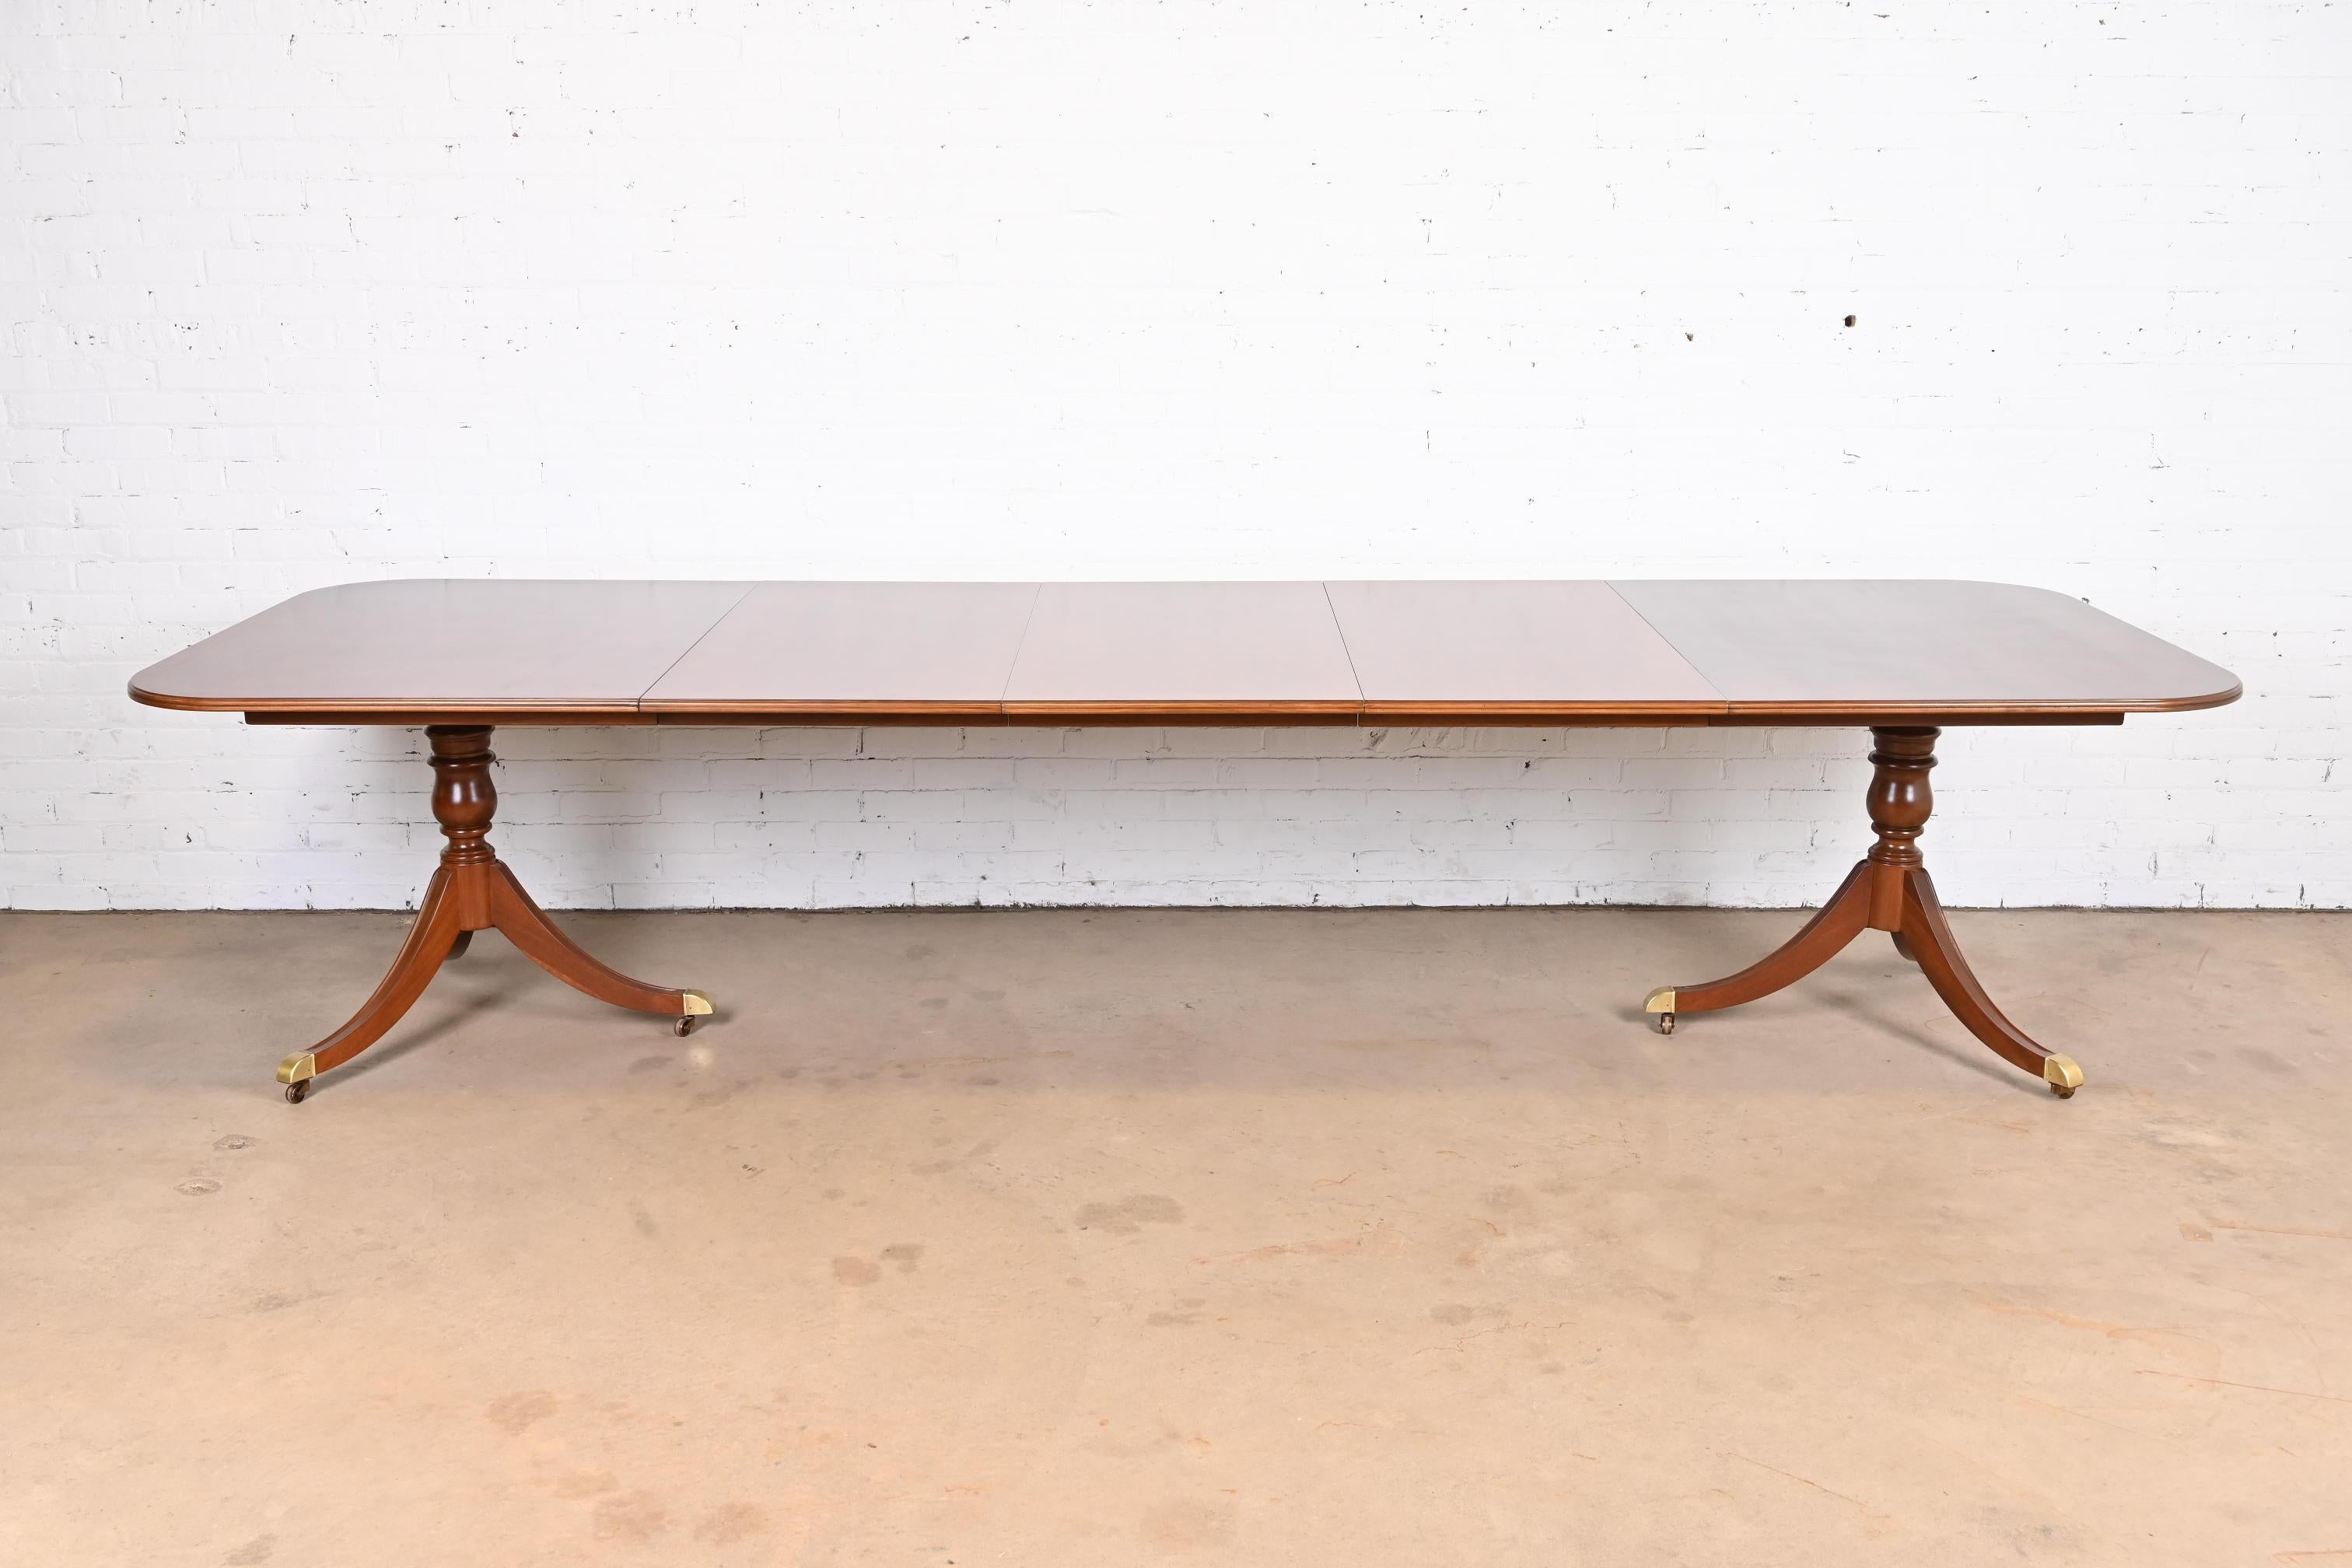 An exceptional Georgian or Regency style double pedestal extension dining table

By Heritage

USA, Circa 1980s

Stunning mahogany with starburst design on the table top, with yew wood banding, carved solid mahogany pedestals, and brass-capped feet